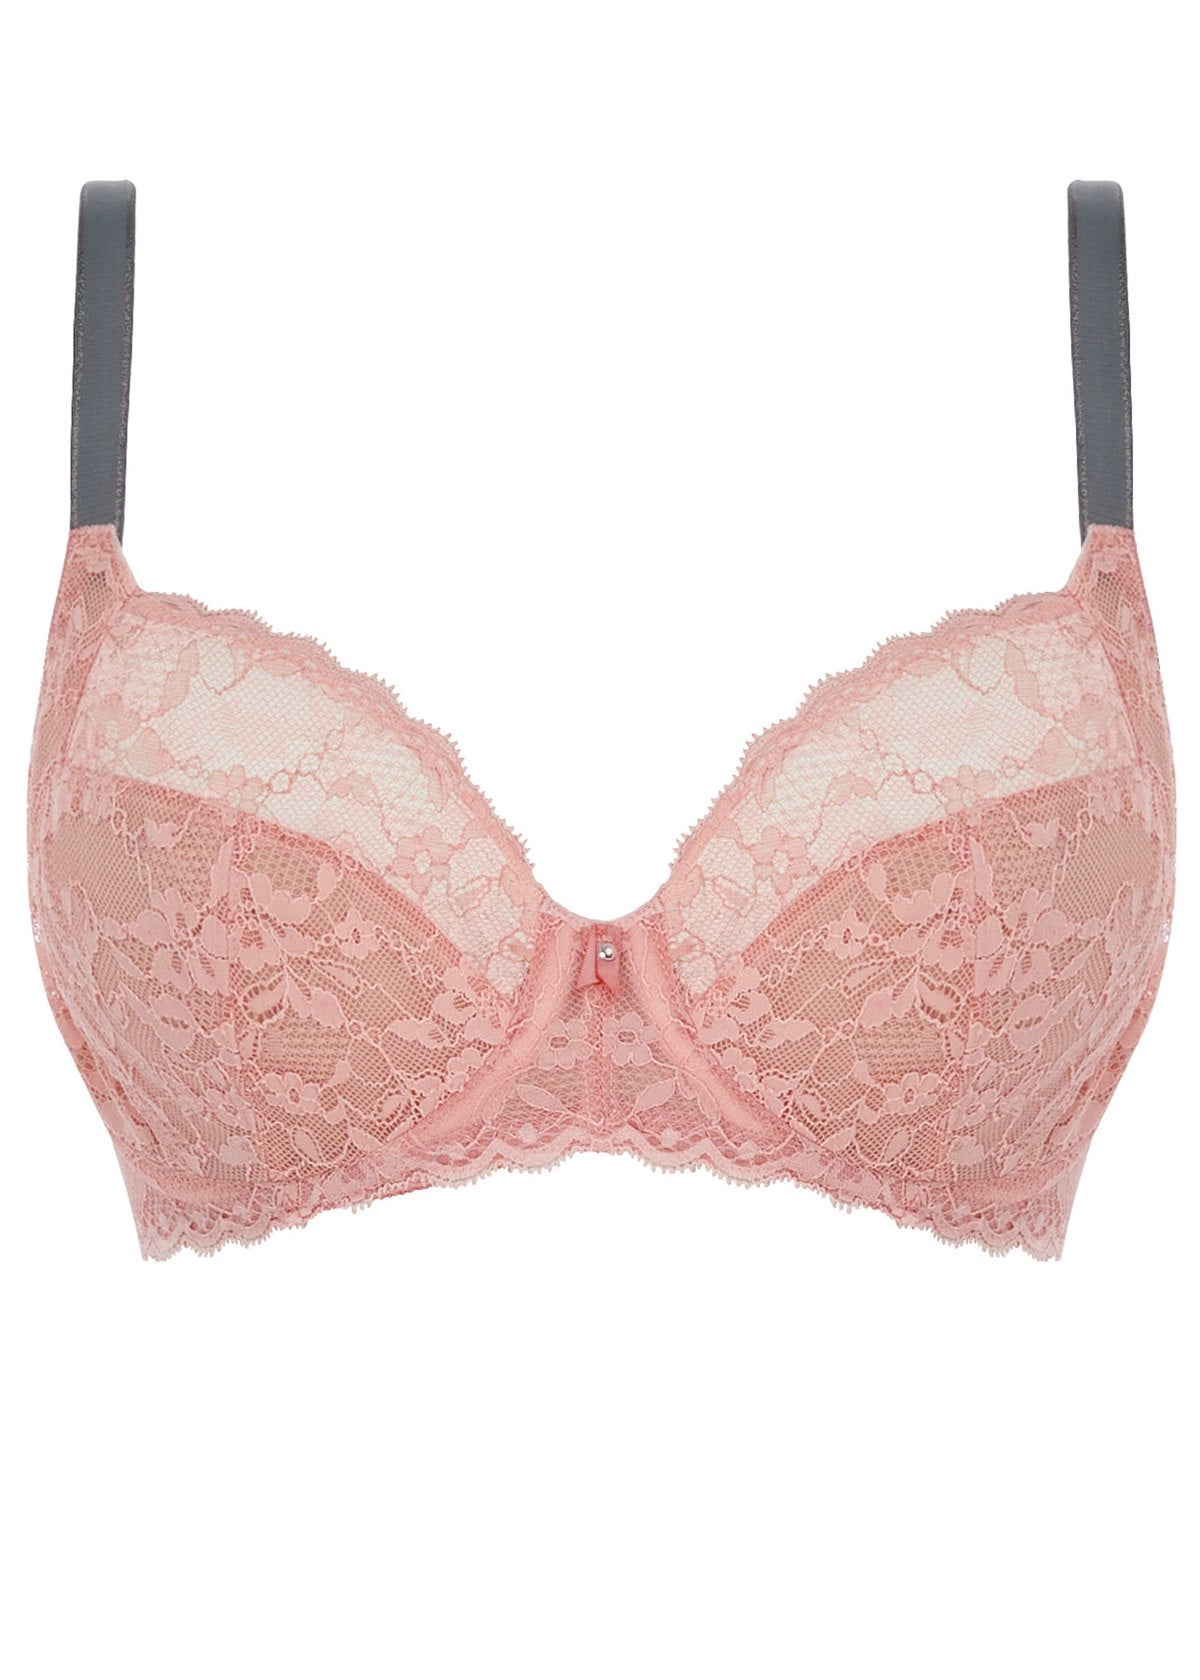 Freya Offbeat Underwire Bra with Side Support #AA5451 - In the Mood  Intimates